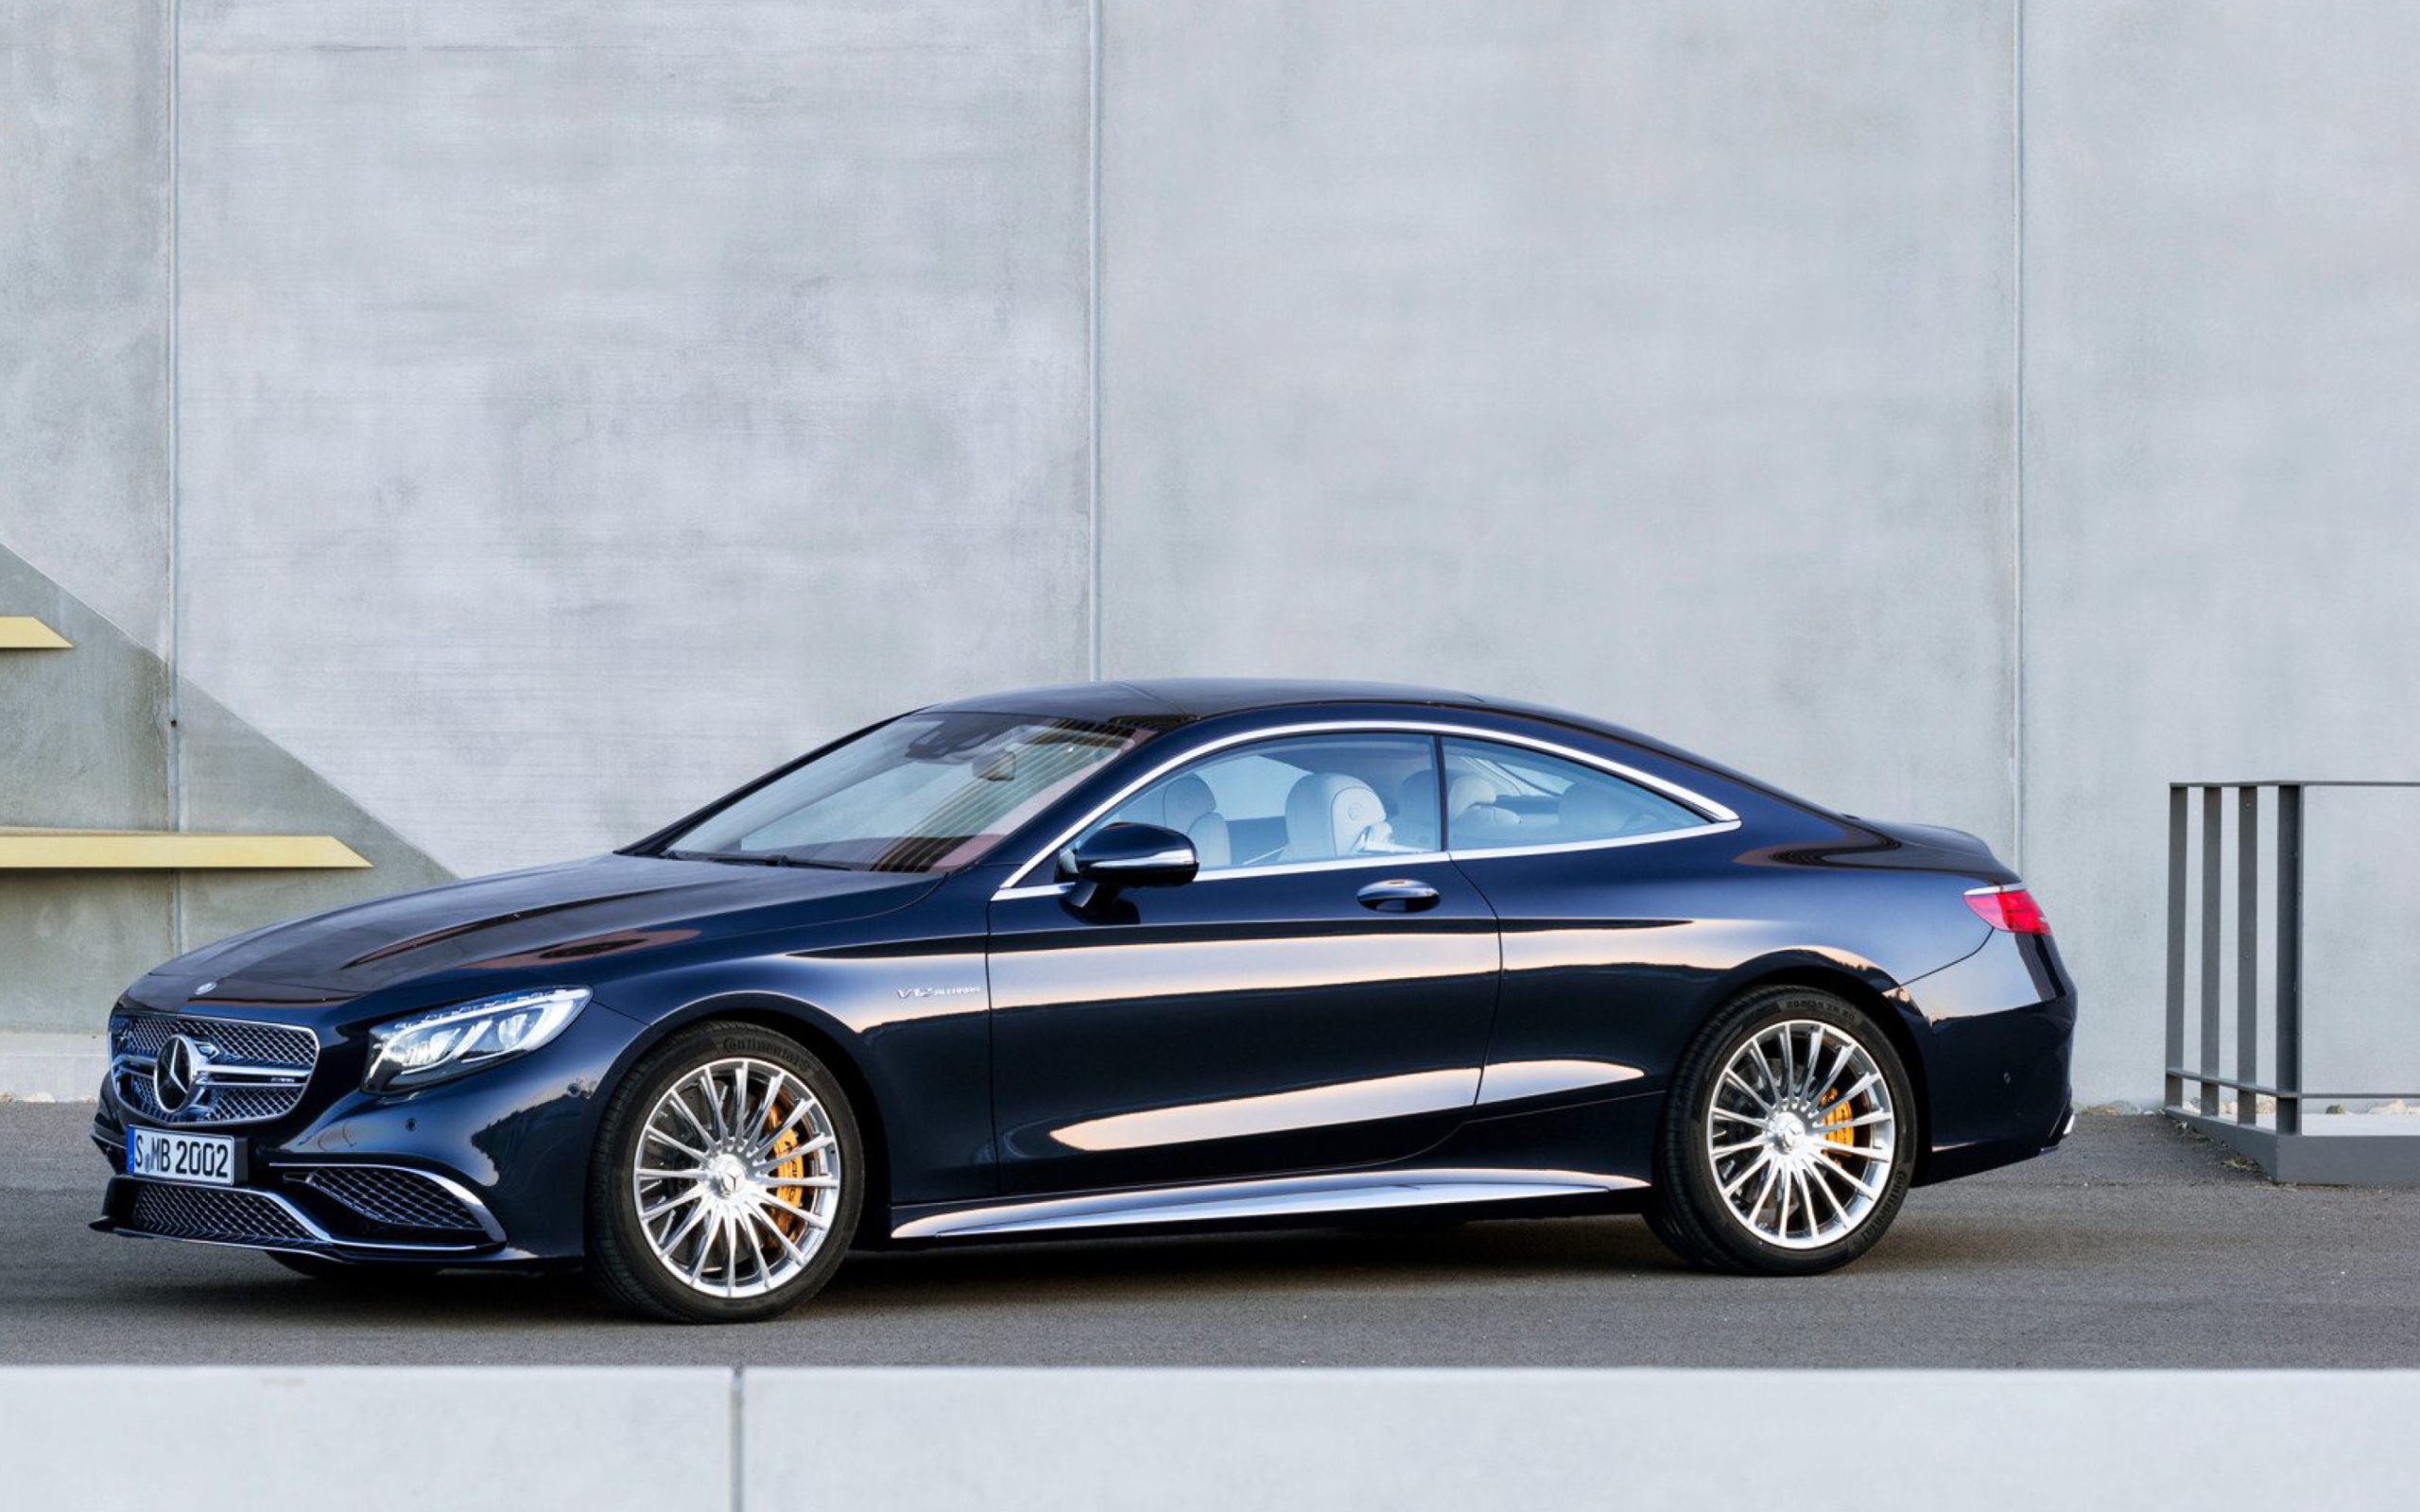 Mercedes-Benz S65 AMG Coupe wallpaper 2560x1600